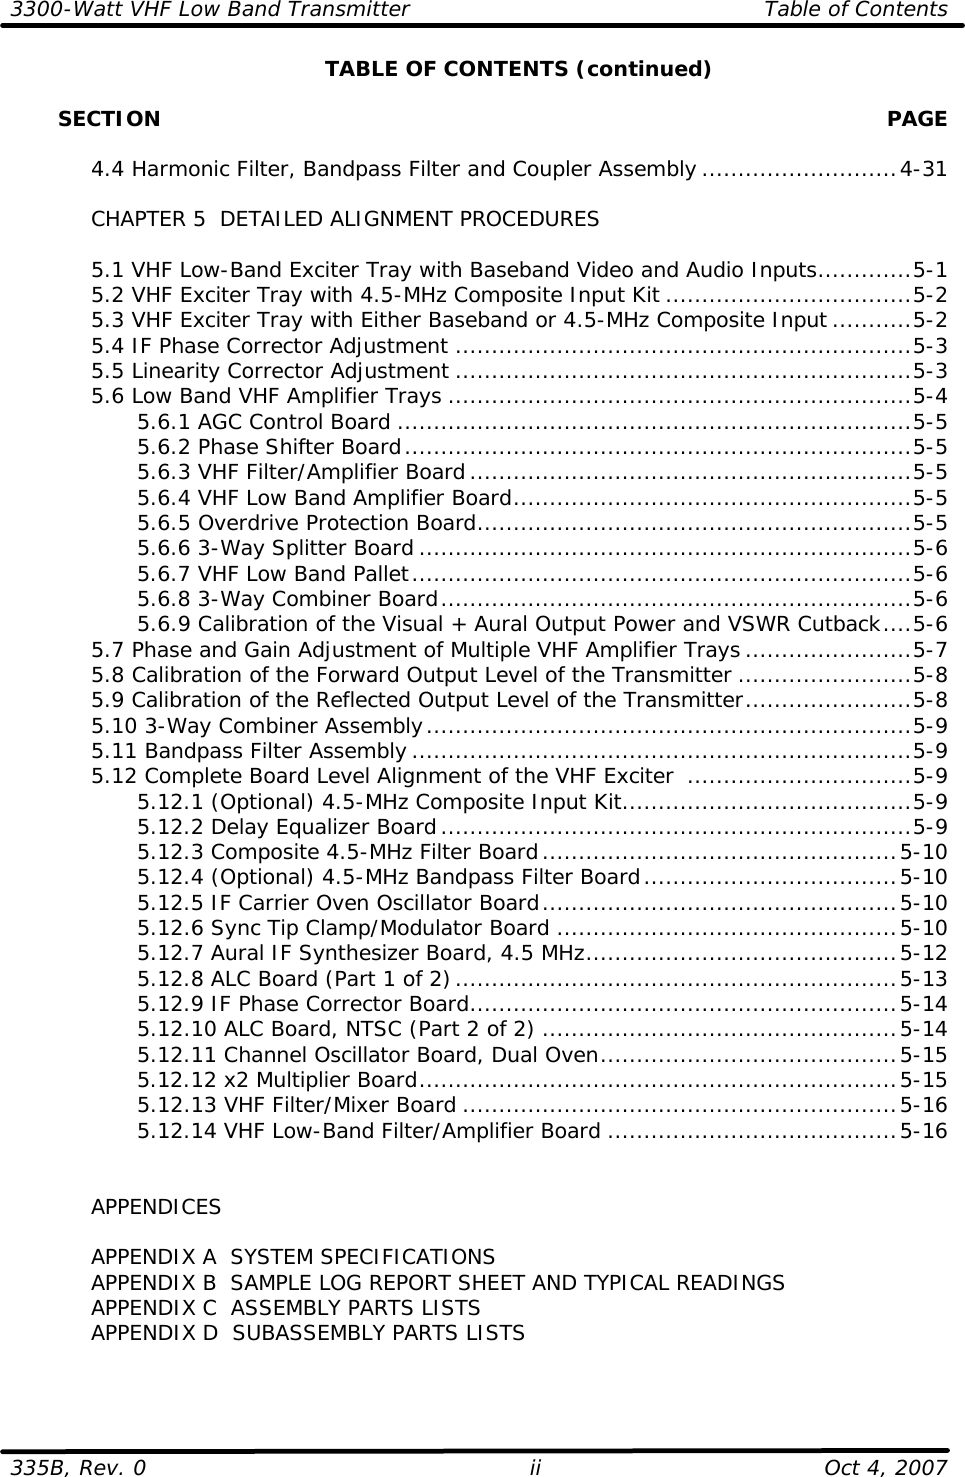 3300-Watt VHF Low Band Transmitter Table of Contents  335B, Rev. 0 ii Oct 4, 2007  TABLE OF CONTENTS (continued)         SECTION    PAGE   4.4 Harmonic Filter, Bandpass Filter and Coupler Assembly ...........................4-31   CHAPTER 5  DETAILED ALIGNMENT PROCEDURES   5.1 VHF Low-Band Exciter Tray with Baseband Video and Audio Inputs.............5-1  5.2 VHF Exciter Tray with 4.5-MHz Composite Input Kit ..................................5-2  5.3 VHF Exciter Tray with Either Baseband or 4.5-MHz Composite Input...........5-2  5.4 IF Phase Corrector Adjustment ...............................................................5-3  5.5 Linearity Corrector Adjustment ...............................................................5-3 5.6 Low Band VHF Amplifier Trays ................................................................5-4     5.6.1 AGC Control Board .......................................................................5-5     5.6.2 Phase Shifter Board......................................................................5-5     5.6.3 VHF Filter/Amplifier Board.............................................................5-5     5.6.4 VHF Low Band Amplifier Board.......................................................5-5     5.6.5 Overdrive Protection Board............................................................5-5     5.6.6 3-Way Splitter Board ....................................................................5-6     5.6.7 VHF Low Band Pallet.....................................................................5-6     5.6.8 3-Way Combiner Board.................................................................5-6     5.6.9 Calibration of the Visual + Aural Output Power and VSWR Cutback....5-6  5.7 Phase and Gain Adjustment of Multiple VHF Amplifier Trays .......................5-7  5.8 Calibration of the Forward Output Level of the Transmitter ........................5-8  5.9 Calibration of the Reflected Output Level of the Transmitter.......................5-8  5.10 3-Way Combiner Assembly...................................................................5-9  5.11 Bandpass Filter Assembly .....................................................................5-9  5.12 Complete Board Level Alignment of the VHF Exciter  ...............................5-9     5.12.1 (Optional) 4.5-MHz Composite Input Kit........................................5-9     5.12.2 Delay Equalizer Board.................................................................5-9     5.12.3 Composite 4.5-MHz Filter Board.................................................5-10     5.12.4 (Optional) 4.5-MHz Bandpass Filter Board...................................5-10     5.12.5 IF Carrier Oven Oscillator Board.................................................5-10     5.12.6 Sync Tip Clamp/Modulator Board ...............................................5-10     5.12.7 Aural IF Synthesizer Board, 4.5 MHz...........................................5-12     5.12.8 ALC Board (Part 1 of 2).............................................................5-13     5.12.9 IF Phase Corrector Board...........................................................5-14     5.12.10 ALC Board, NTSC (Part 2 of 2) .................................................5-14     5.12.11 Channel Oscillator Board, Dual Oven.........................................5-15     5.12.12 x2 Multiplier Board..................................................................5-15     5.12.13 VHF Filter/Mixer Board ............................................................5-16     5.12.14 VHF Low-Band Filter/Amplifier Board ........................................5-16        APPENDICES   APPENDIX A  SYSTEM SPECIFICATIONS  APPENDIX B  SAMPLE LOG REPORT SHEET AND TYPICAL READINGS  APPENDIX C  ASSEMBLY PARTS LISTS  APPENDIX D  SUBASSEMBLY PARTS LISTS  